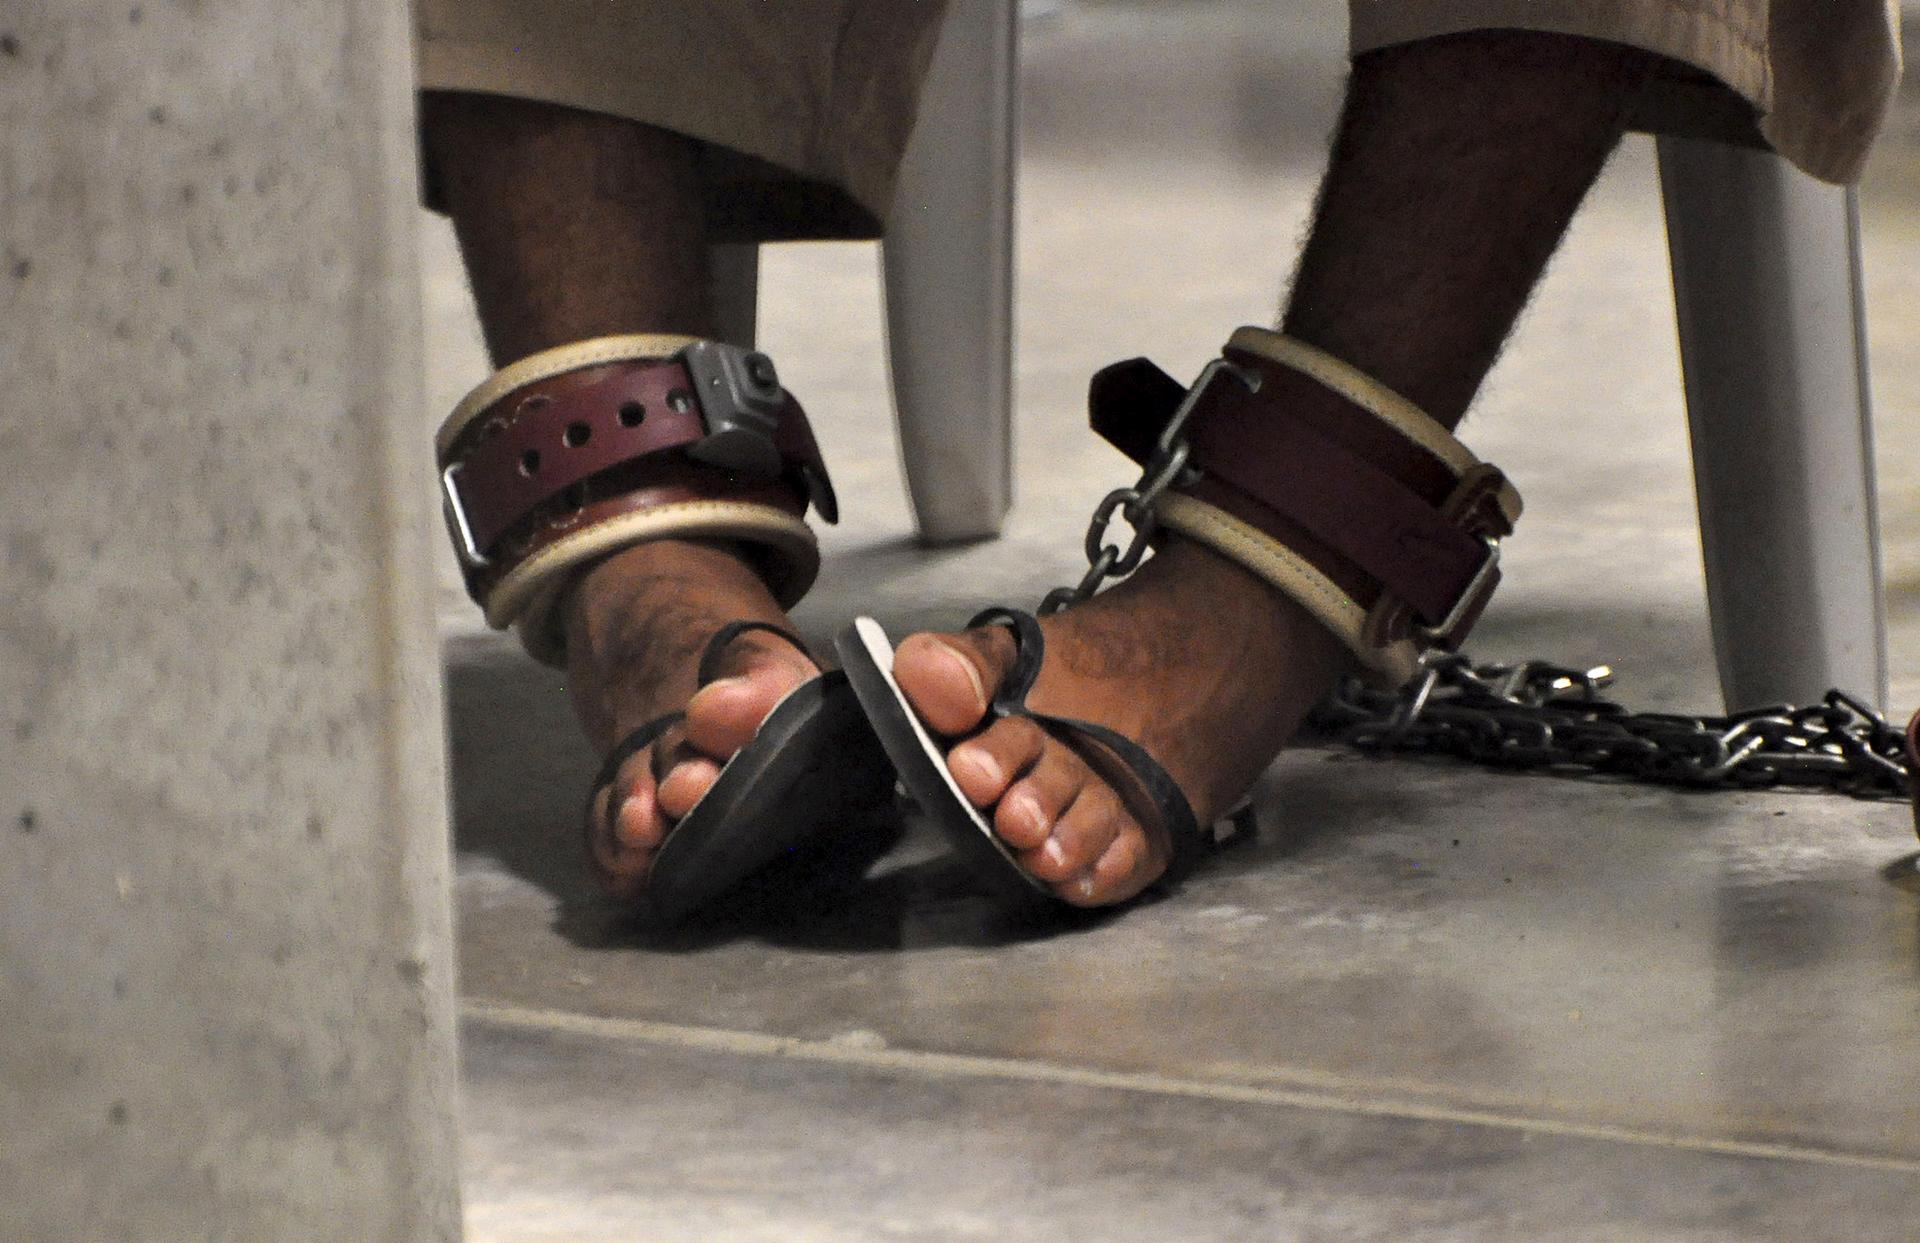 A Guantanamo detainee's feet are shackled to the floor as he attends a 